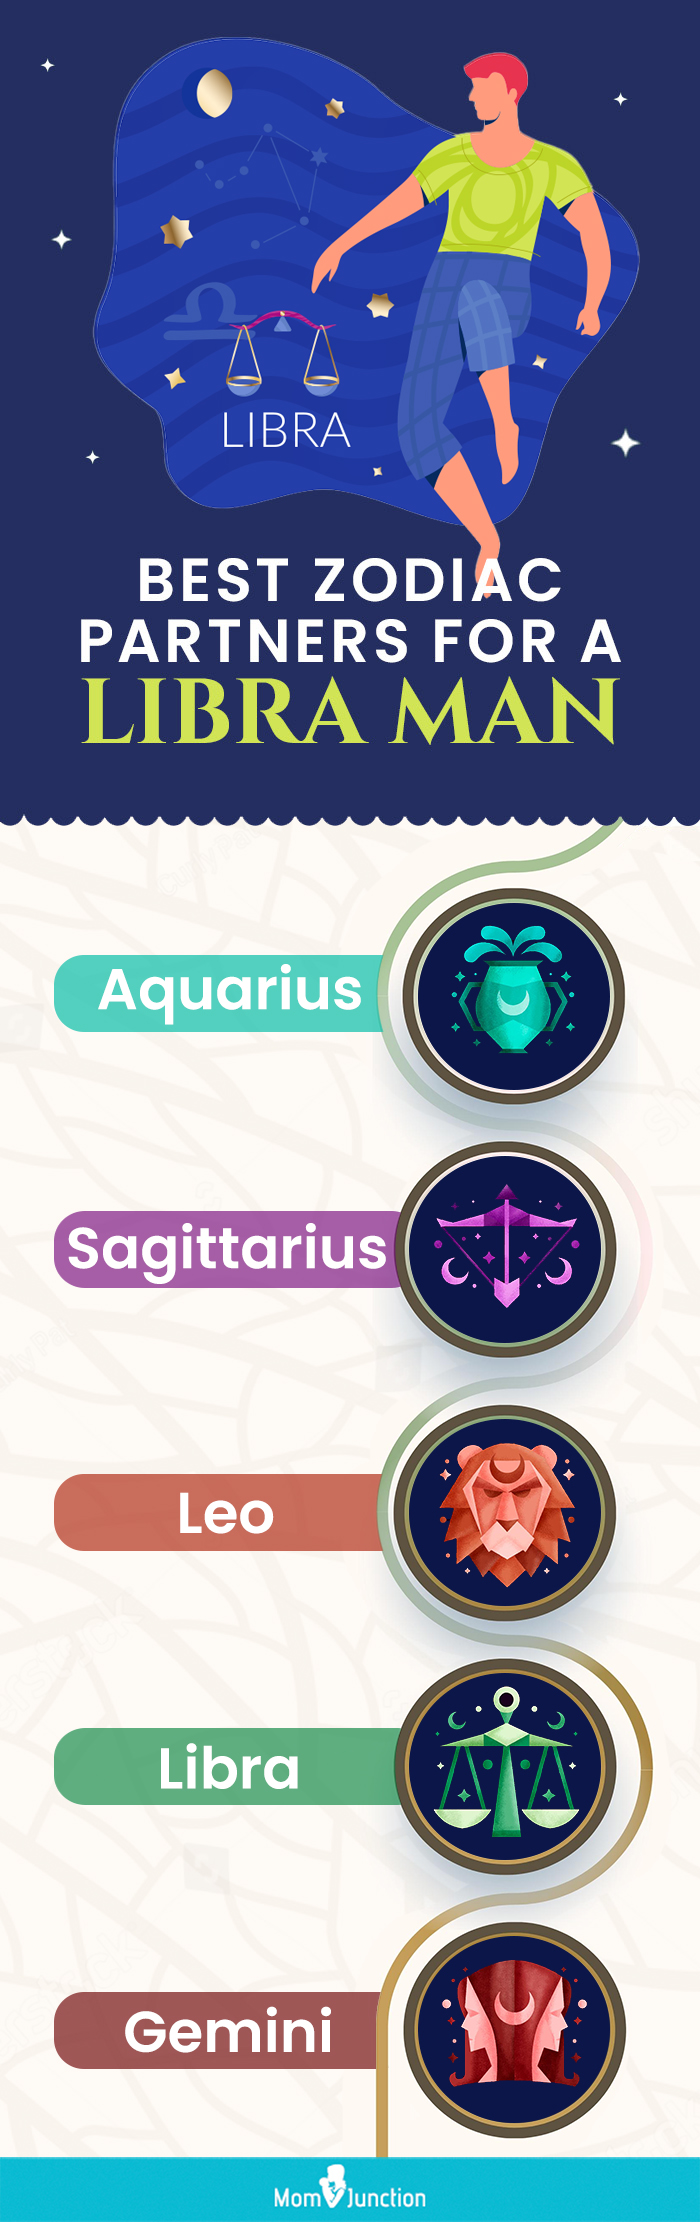 best zodiac partners for a libra man (infographic)